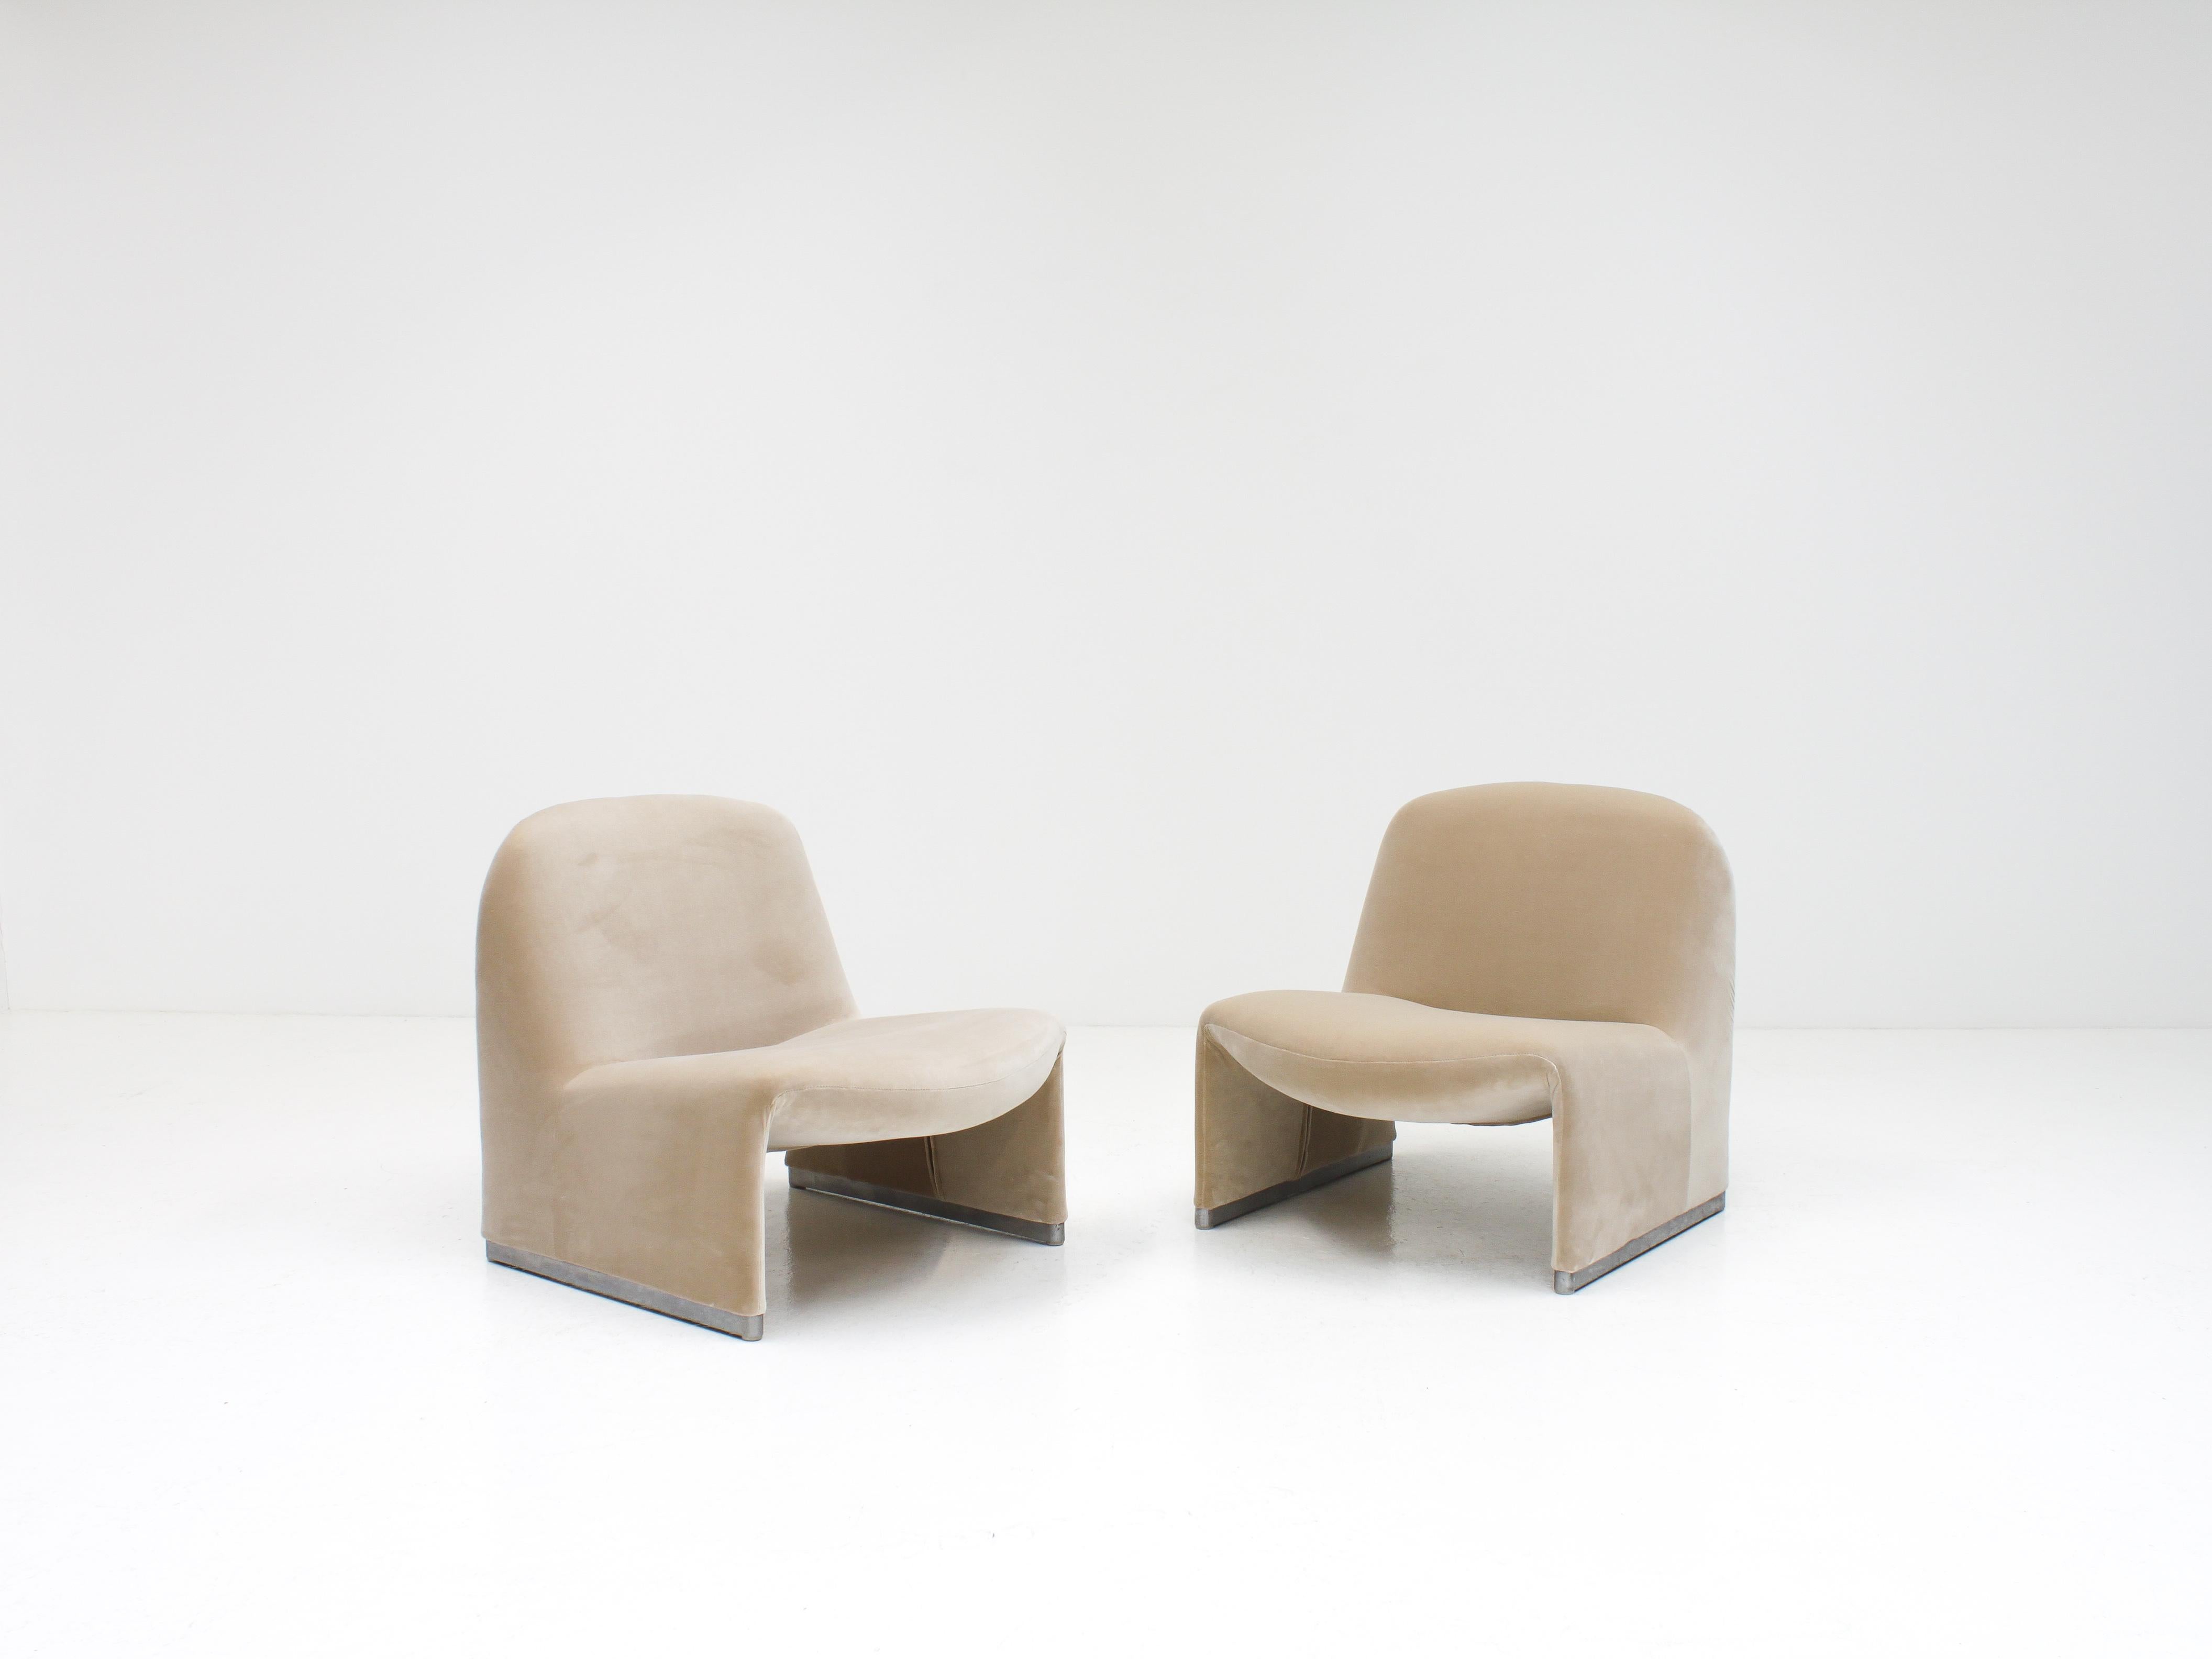 Giancarlo Piretti “Alky” Chairs in New Velvet, Artifort, 1970s - *Customizable* In Good Condition For Sale In London Road, Baldock, Hertfordshire